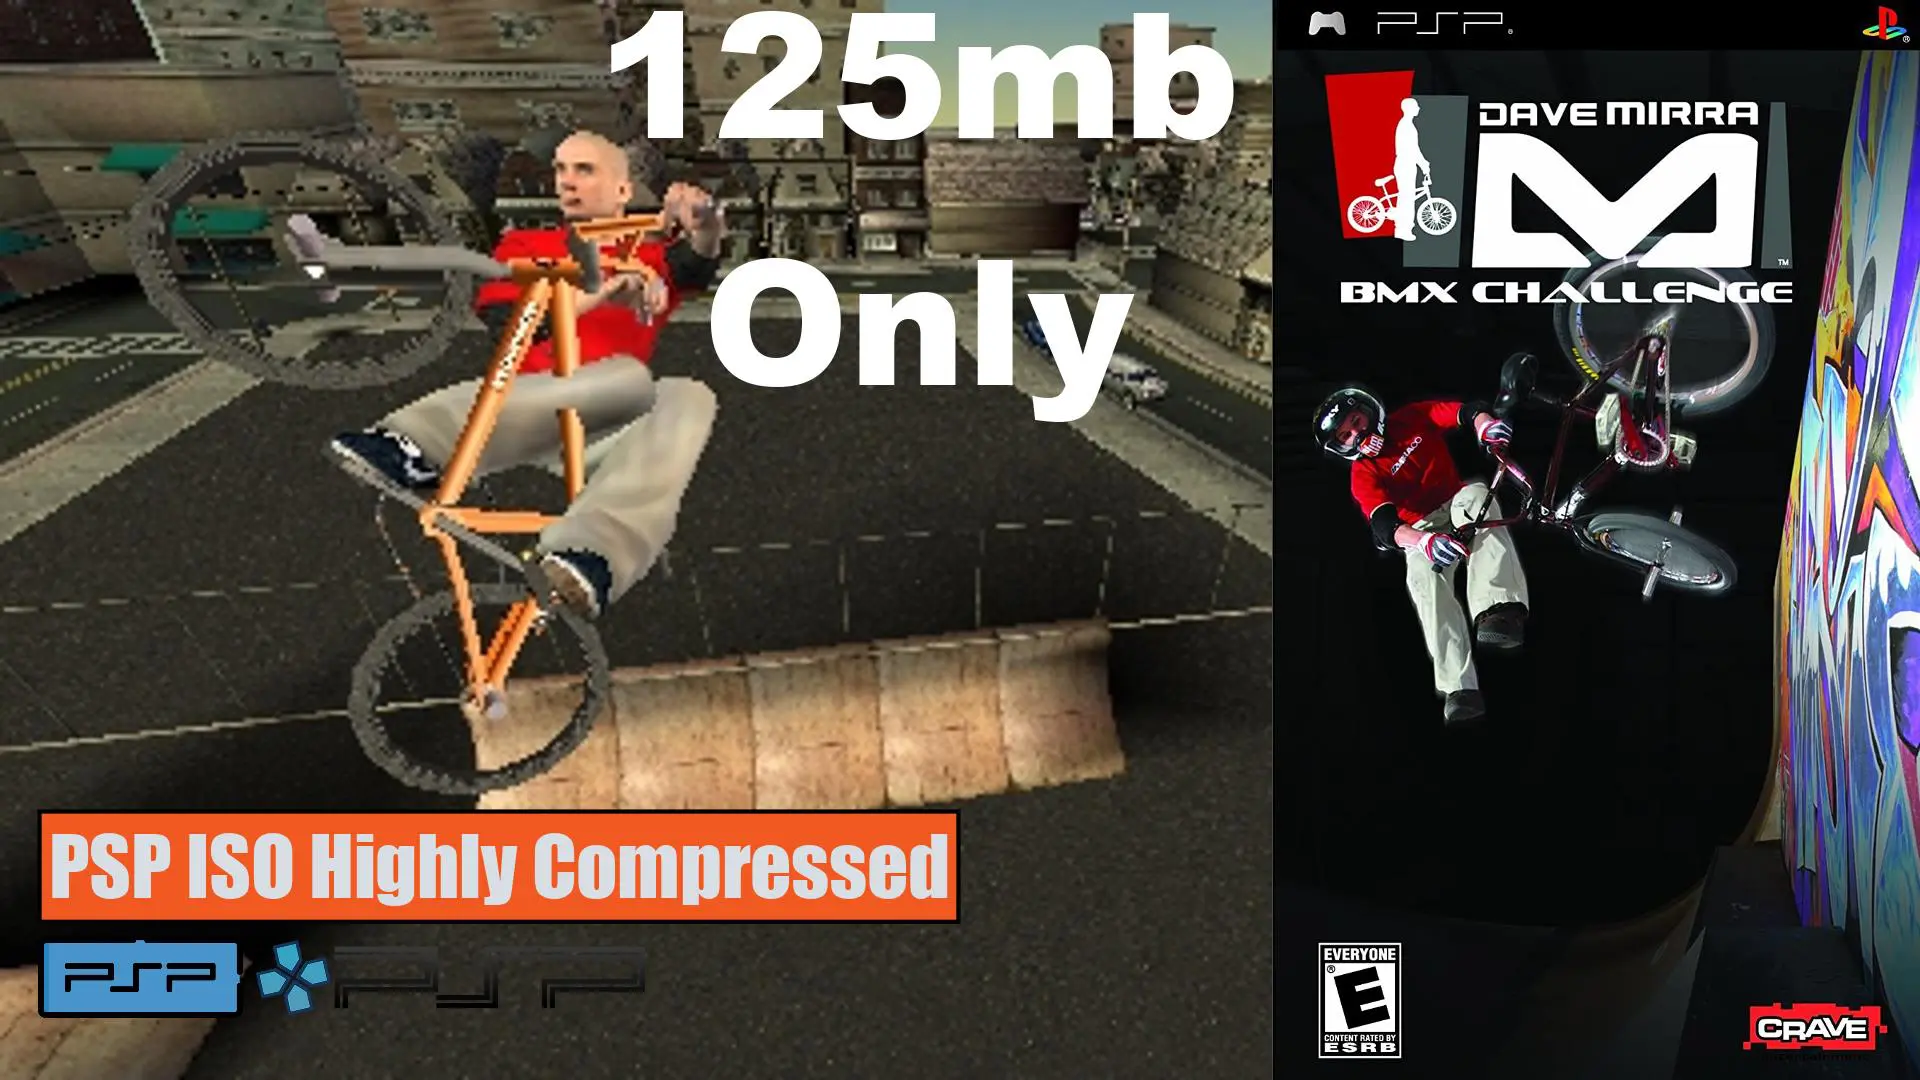 Dave Mirra BMX Challenge PSP ISO Highly Compressed